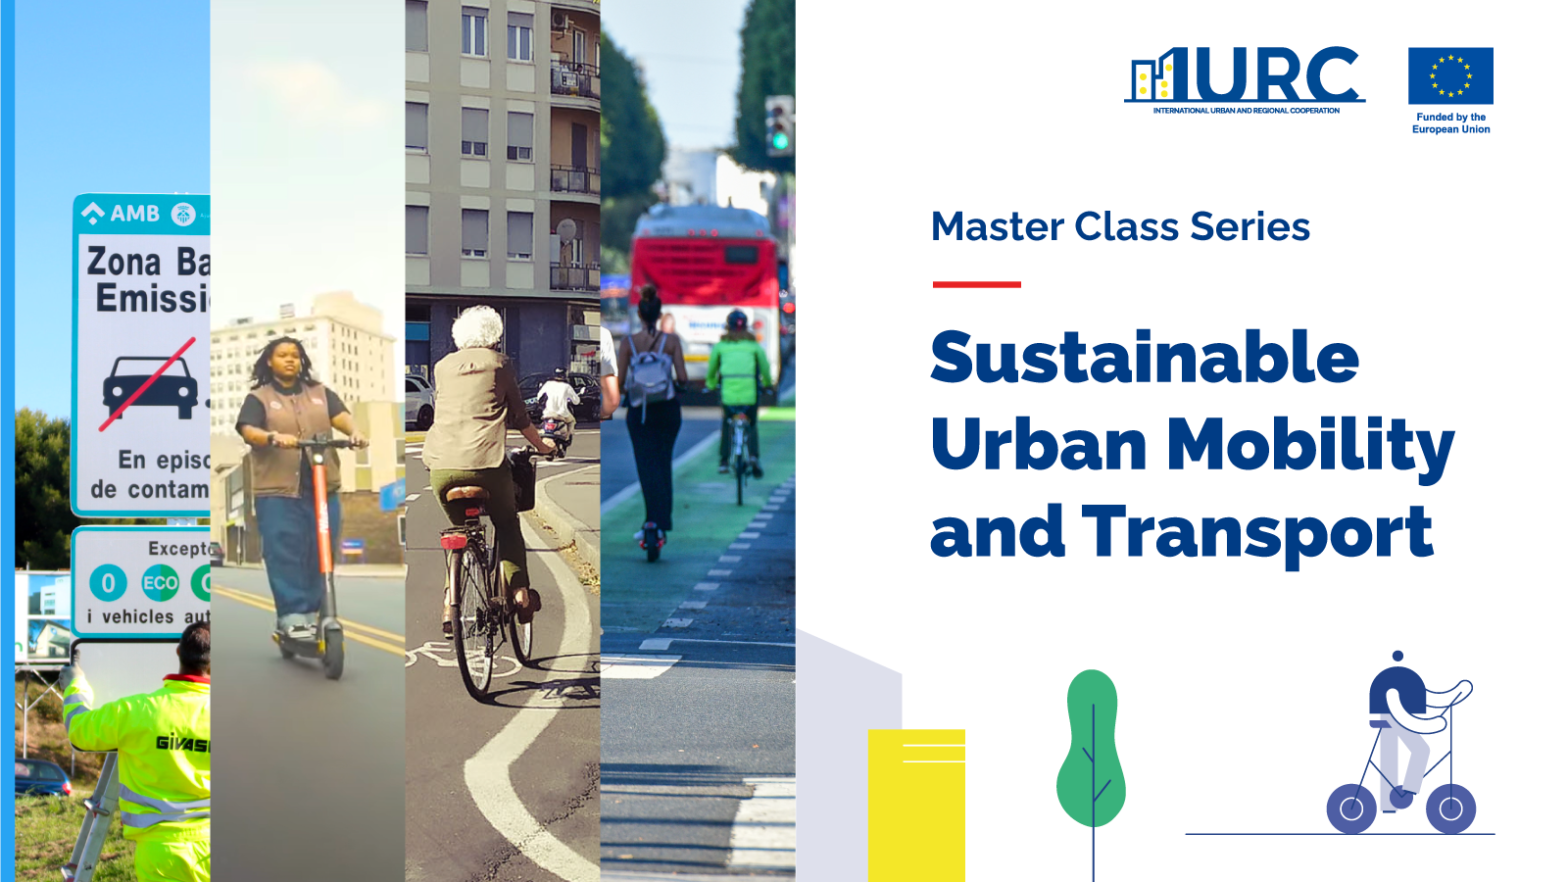 Master Class Series Sustainable Urban Mobility and Transport